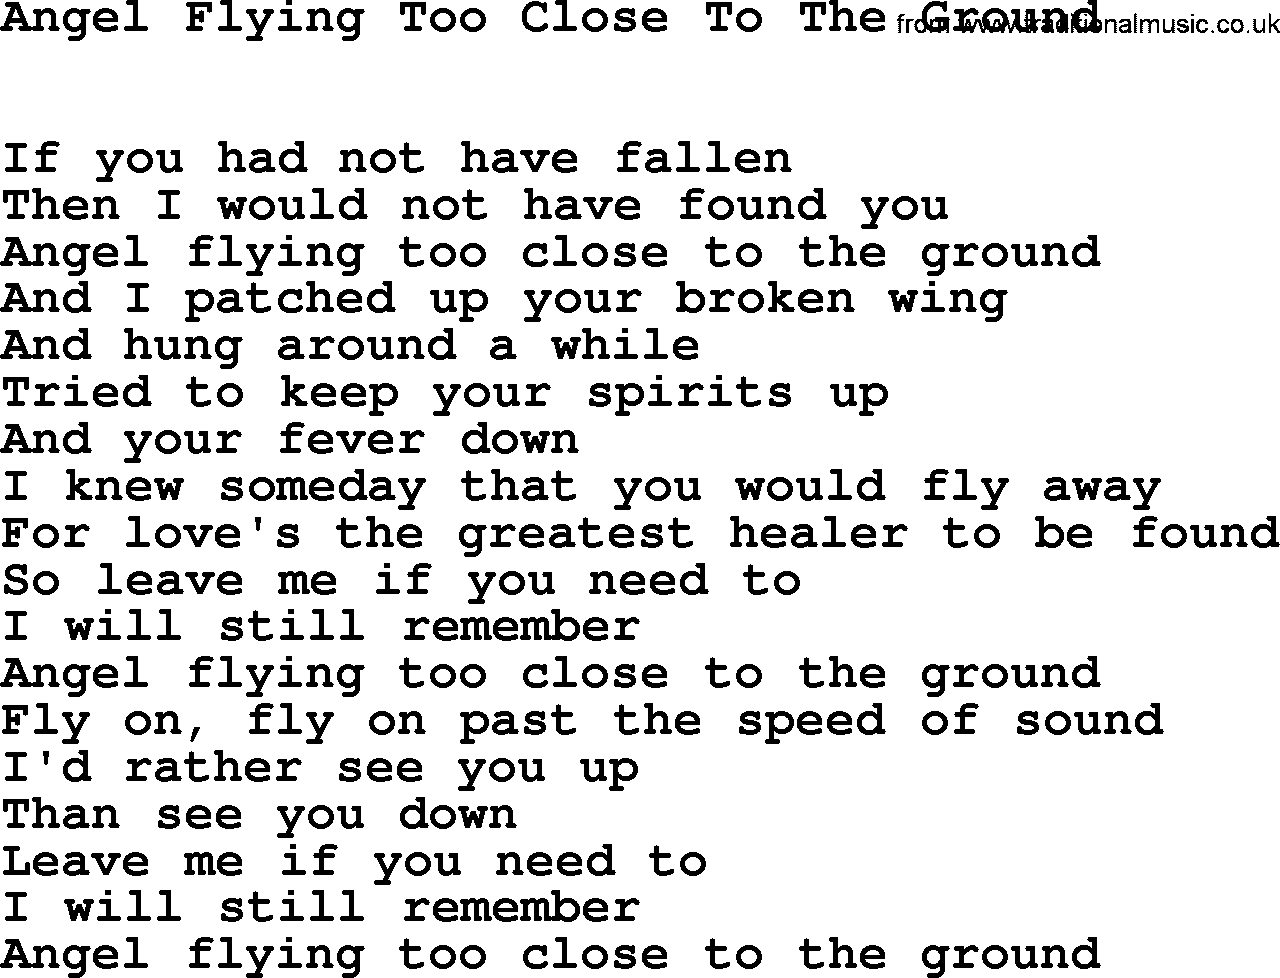 Willie Nelson song: Angel Flying Too Close To The Ground lyrics